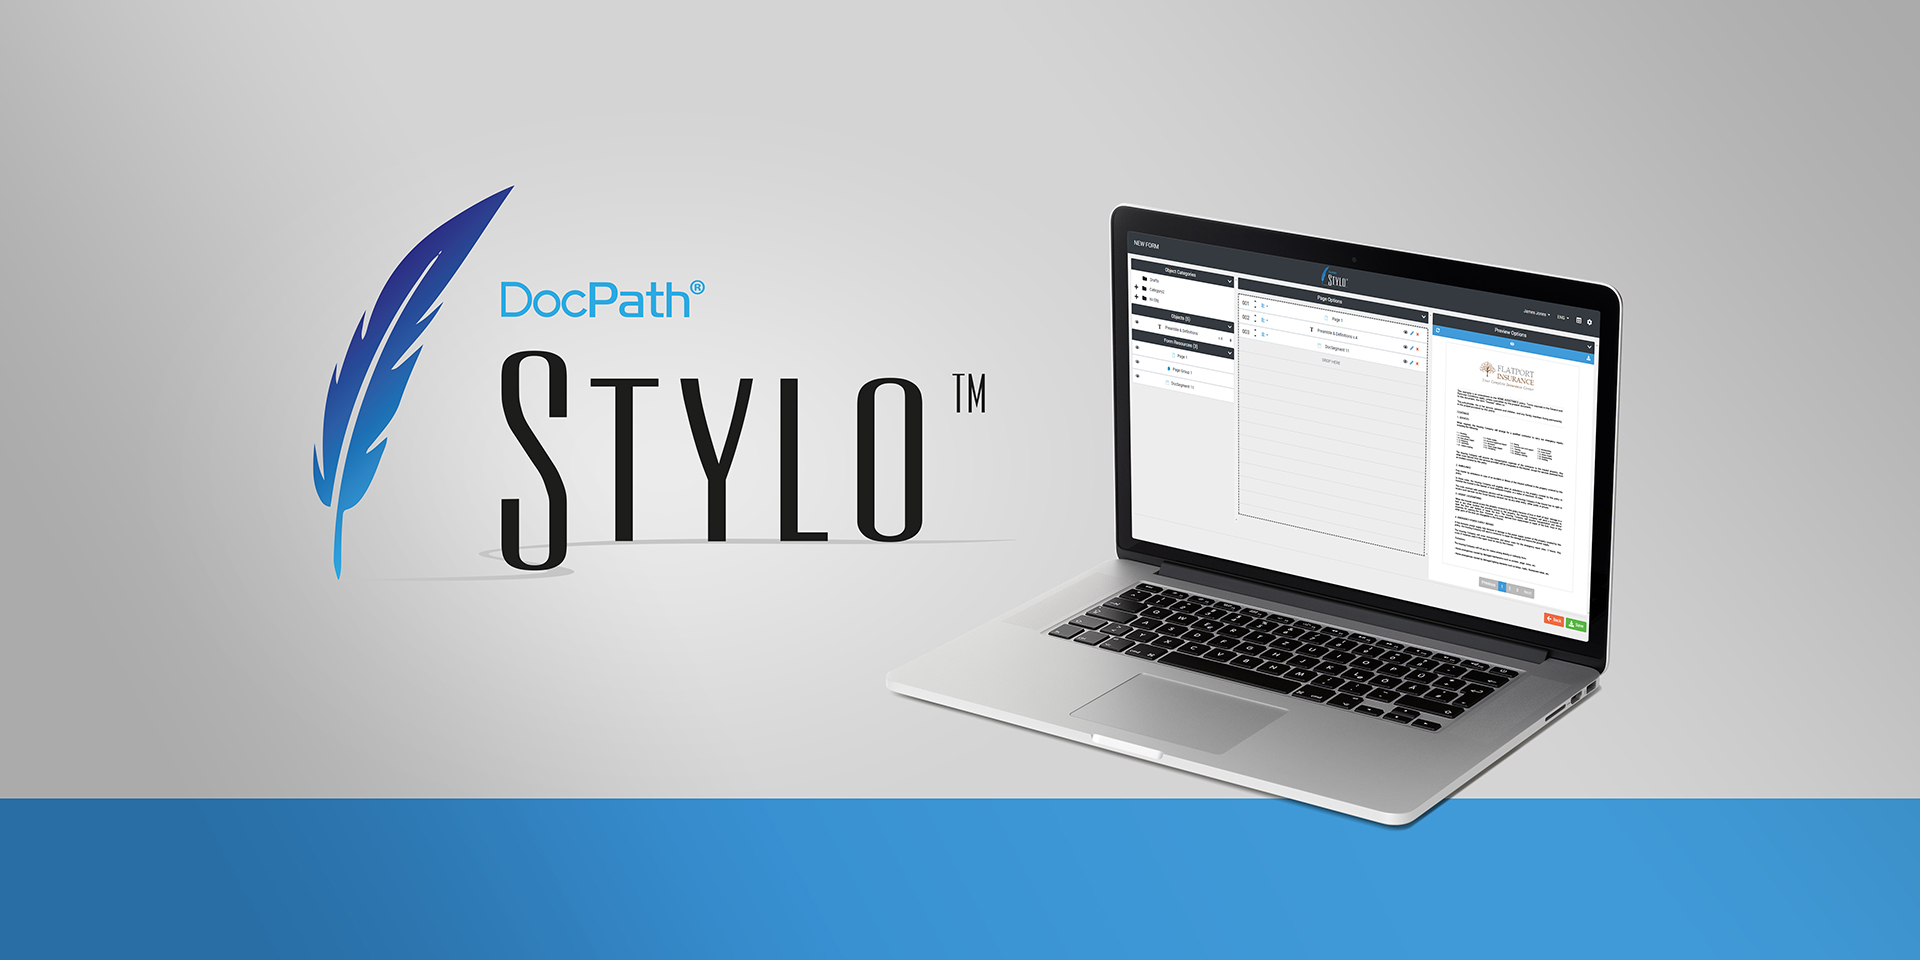 Stylo document software is part of DocPath's Customer Communication and Document Output Management solutions suite for offering the possibility to modify and manage documents easily